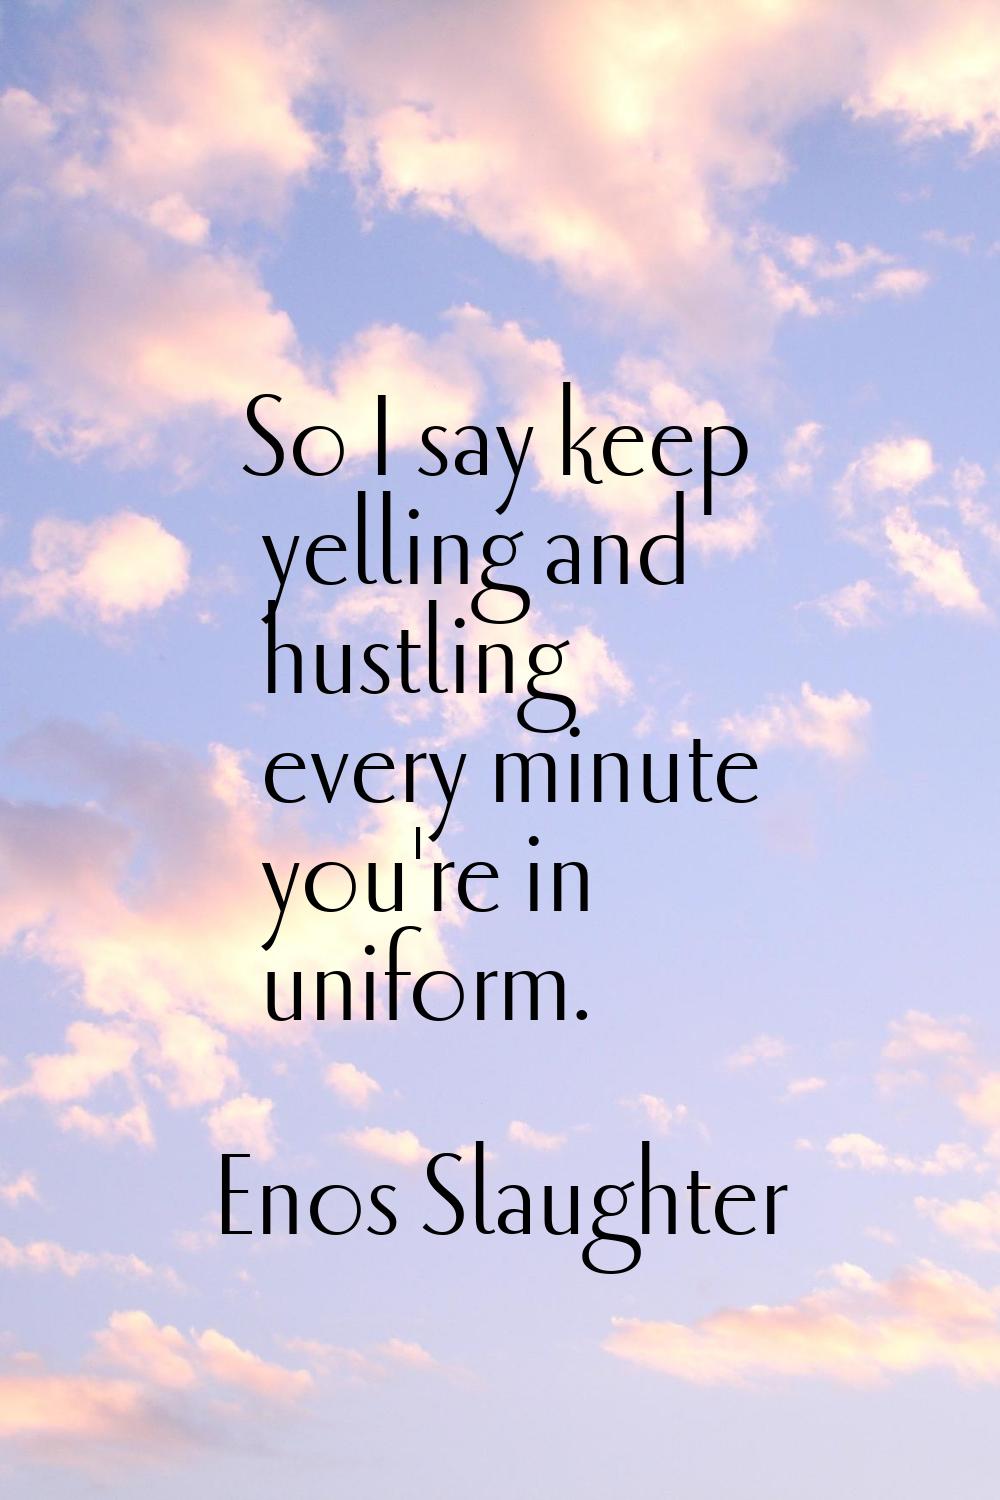 So I say keep yelling and hustling every minute you're in uniform.